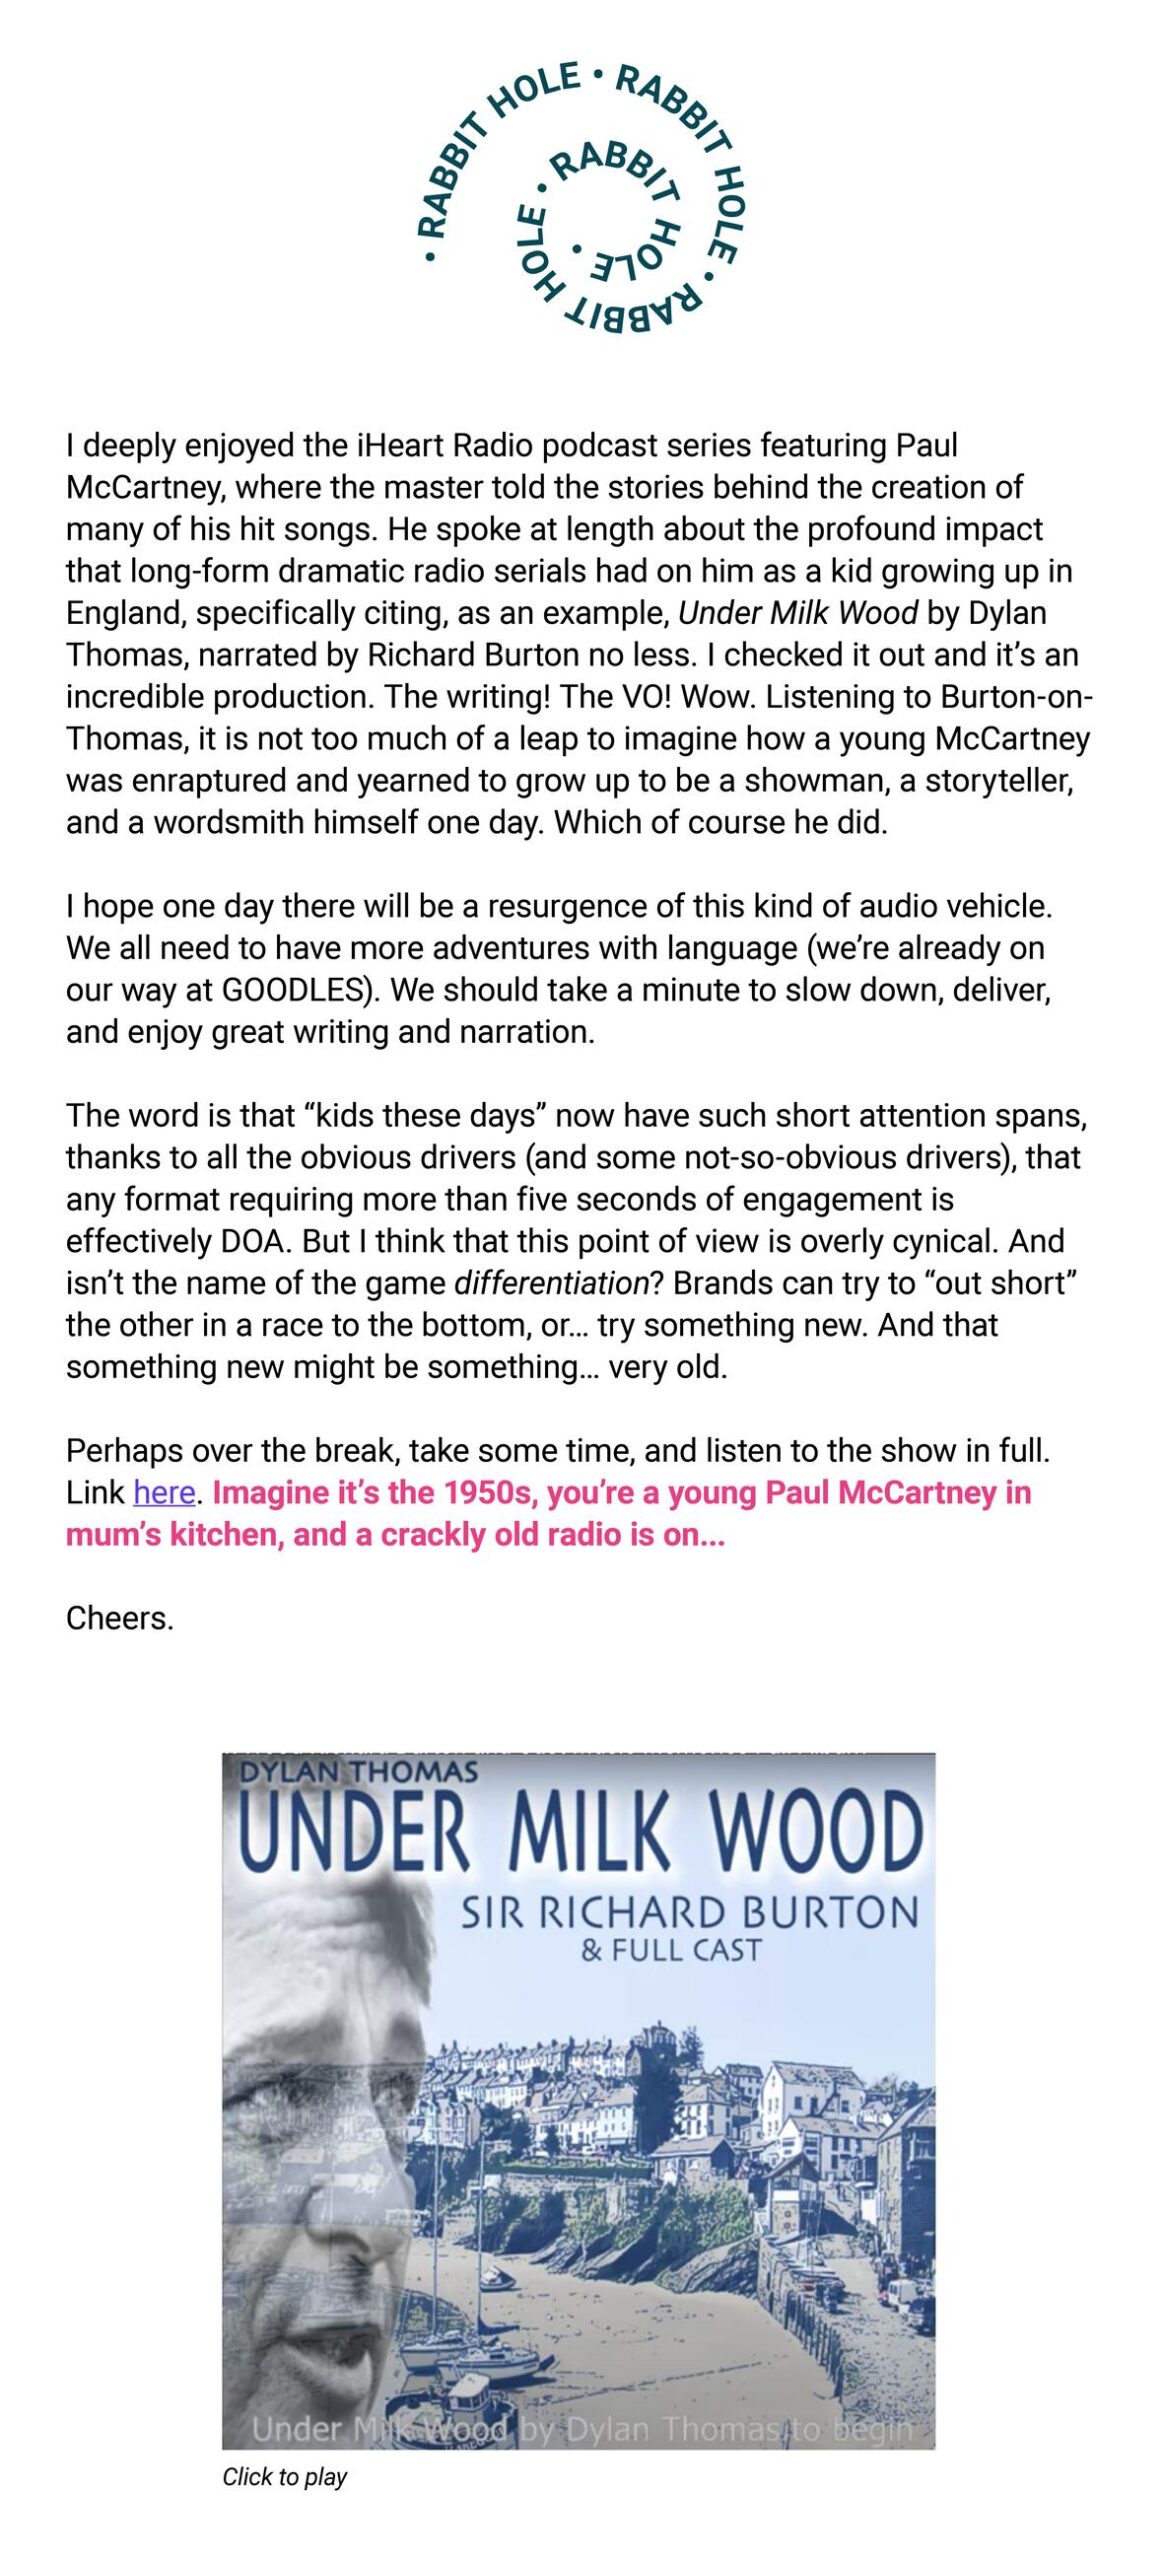 The image is a newsletter excerpt discussing the impact of classic radio serials on Paul McCartney, highlighting "Under Milk Wood" by Dylan Thomas, narrated by Richard Burton. It reflects on the profound influence such works can have, lamenting the short attention spans of "kids these days" and suggesting that brands should focus on differentiation, possibly by embracing older forms of media. The author advocates for taking time to appreciate language and storytelling, suggesting listeners imagine being a young Paul McCartney in the 1950s, listening to a radio play. The text ends with an encouragement to listen to "Under Milk Wood" and a cheerful "Cheers."

The bottom of the image shows a cover of "Under Milk Wood" with a picture of Richard Burton and a coastal town background, with a caption that reads "Click to play."

Rabbit Hole

I deeply enjoyed the iHeart Radio podcast series featuring Paul McCartney, where the master told the stories behind the creation of many of his hit songs. He spoke at length about the profound impact that long-form dramatic radio serials had on him as a kid growing up in England, specifically citing, as an example, Under Milk Wood by Dylan Thomas, narrated by Richard Burton no less. I checked it out and it's an incredible production. The writing! The VO! Wow. Listening to Burton-on-Thomas, it is not too much of a leap to imagine how a young McCartney was enraptured and yearned to grow up to be a showman, a storyteller, and a wordsmith himself one day. Which of course he did.

I hope one day there will be a resurgence of this kind of audio vehicle. We all need to have more adventures with language (we're already on our way at GOODLES). We should take a minute to slow down, deliver, and enjoy great writing and narration.

The word is that "kids these days" now have such short attention spans, thanks to all the obvious drivers (and some not-so-obvious drivers), that any format requiring more than five seconds of engagement is effectively DOA. But I think that this point of view is overly cynical. And isn't the name of the game differentiation? Brands can try to "out short" the other in a race to the bottom, or… try something new. And that something new might be something… very old.

Perhaps over the break, take some time, and listen to the show in full. Link here. Imagine it's the 1950s, you're a young Paul McCartney in mum's kitchen, and a crackly old radio is on…

Cheers.